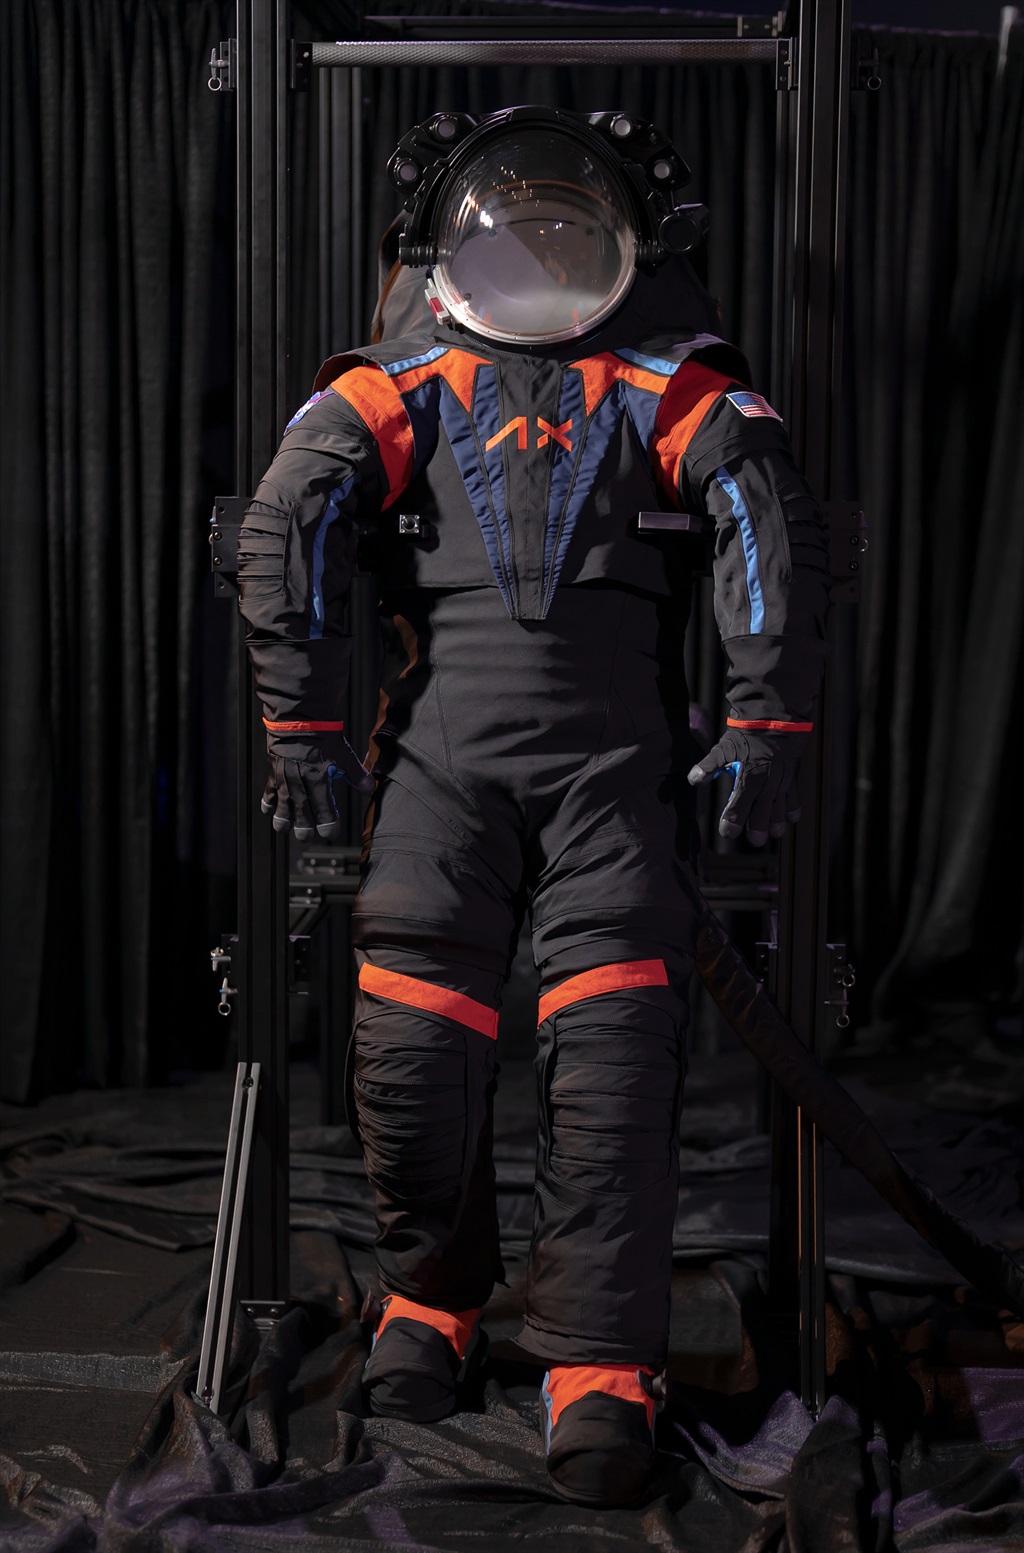 The Axiom Space Spacesuit 